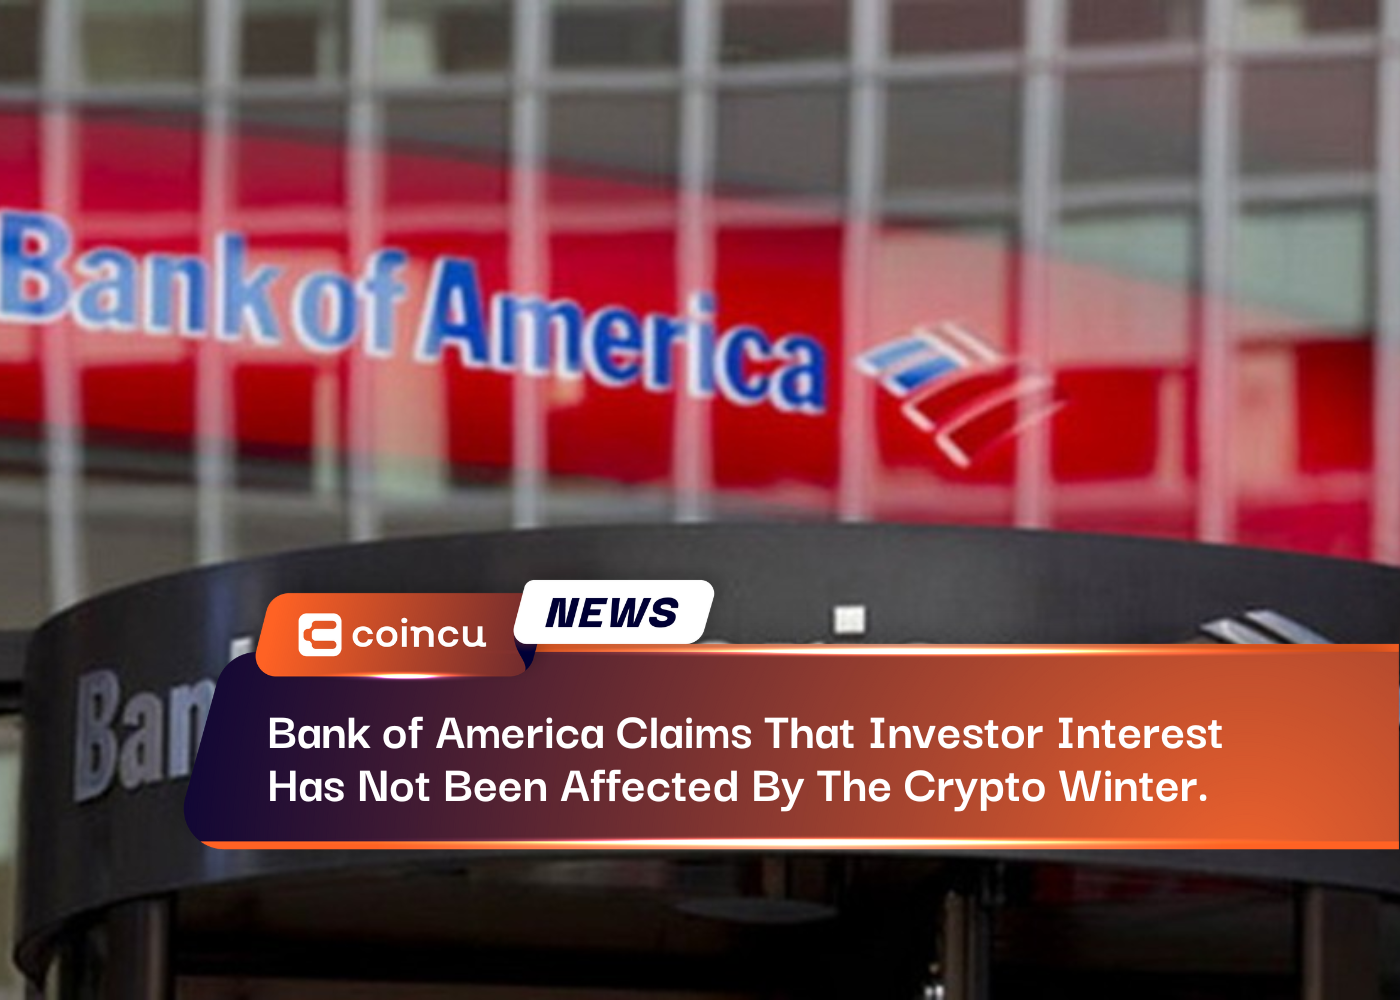 Bank of America Claims That Investor Interest Has Not Been Affected By The Crypto Winter.